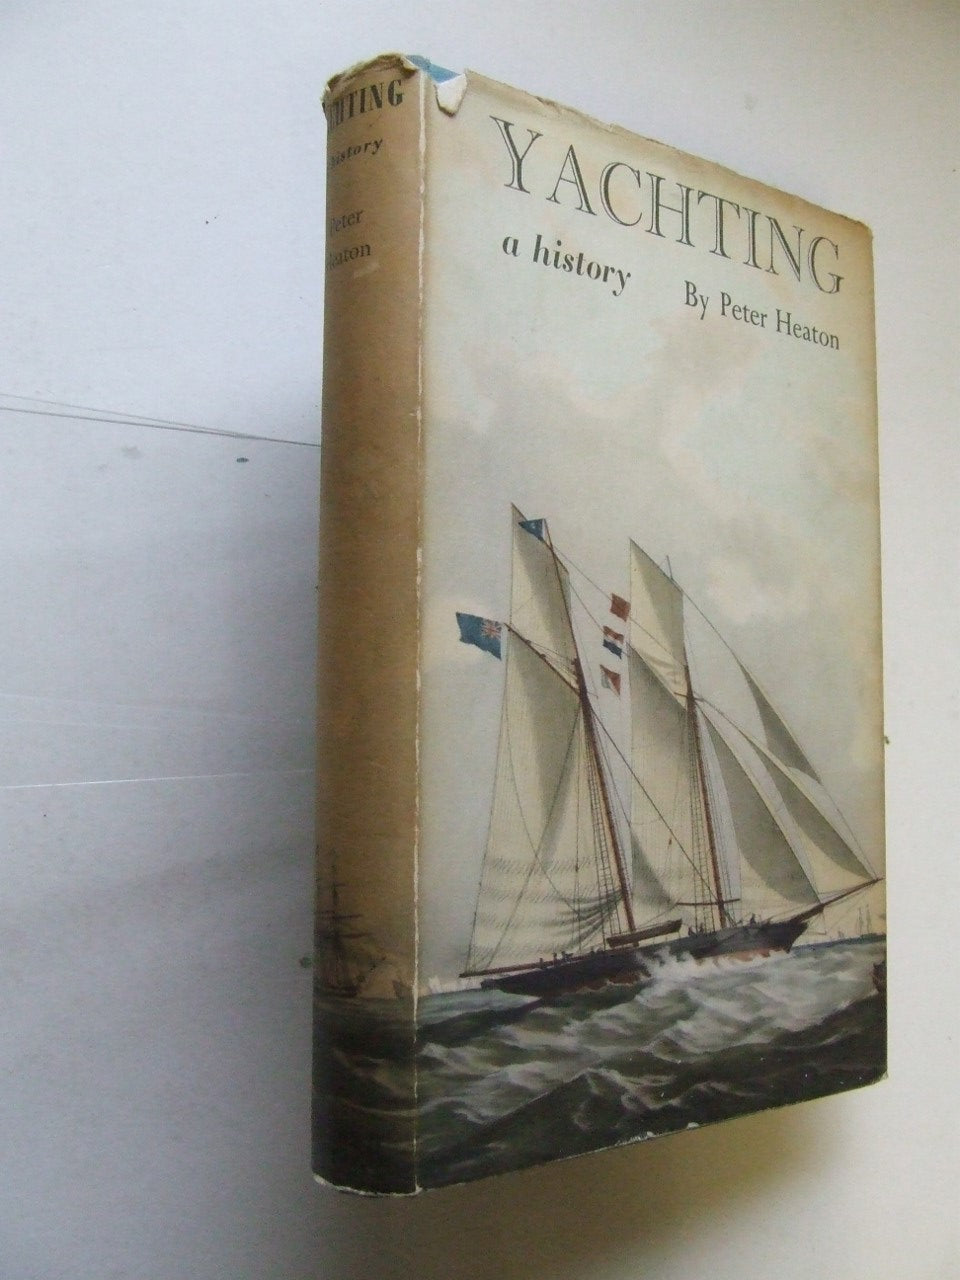 Yachting, a history